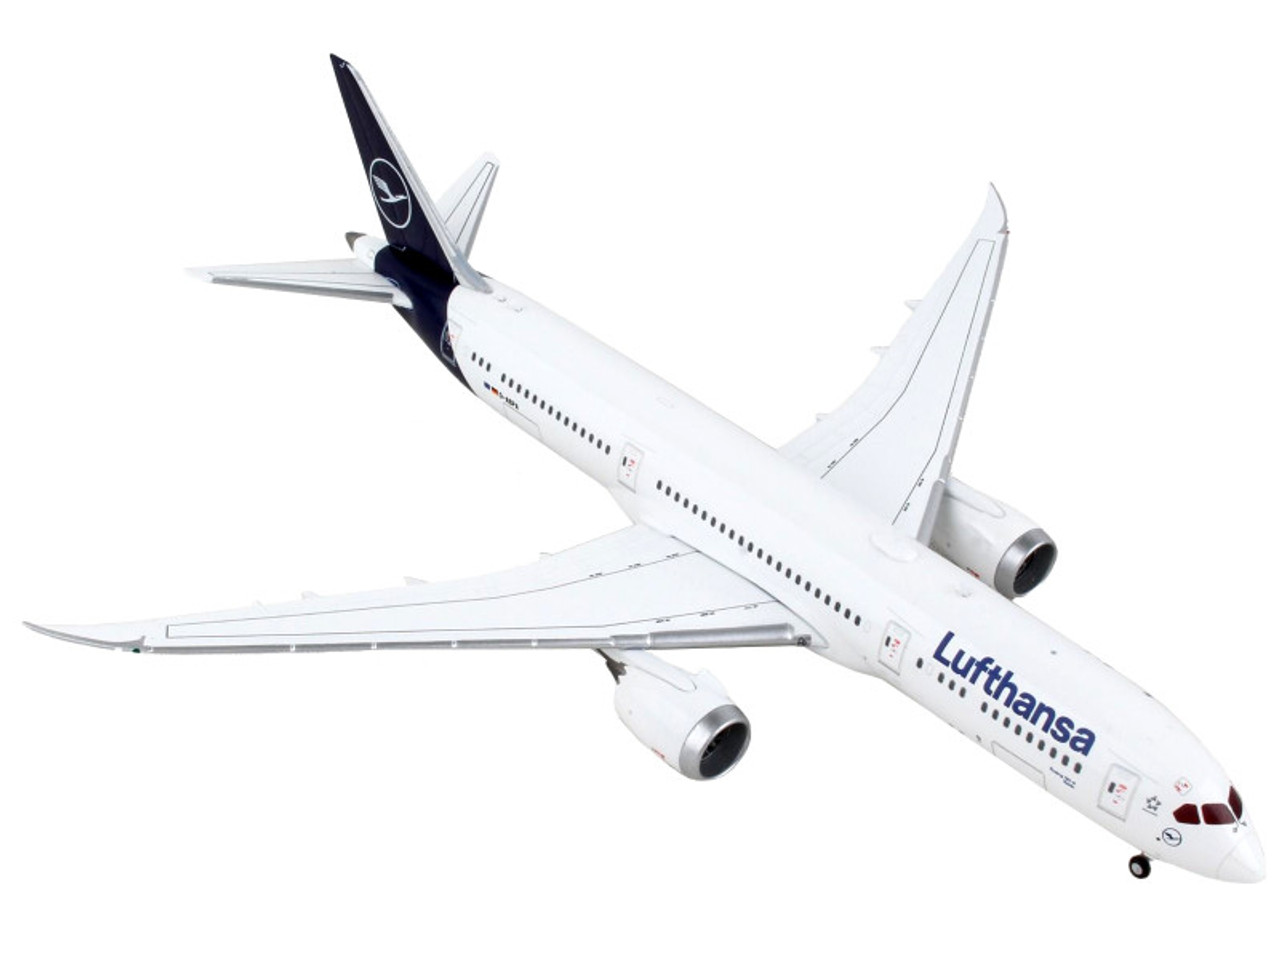 Boeing 787-9 Commercial Aircraft "Lufthansa - D-ABPA" White with Dark Blue Tail 1/400 Diecast Model Airplane by GeminiJets